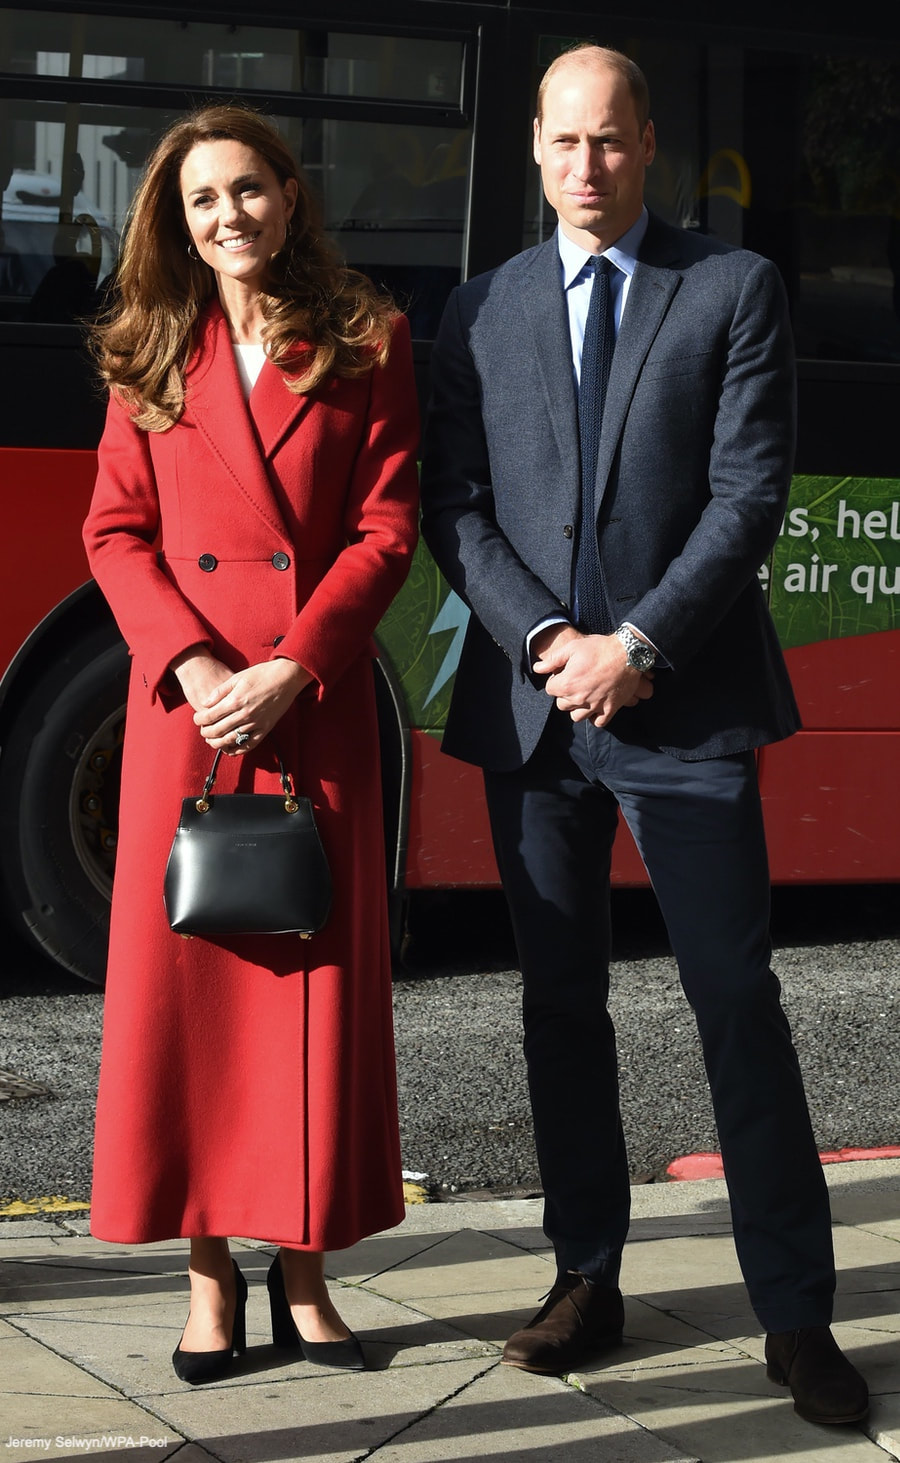 Kate Middleton Duchess of Cambridge custom made/bespoke Alexander McQueen red double breast full length coat with peak lapel for Hold Still photography project at Waterloo Station in London 